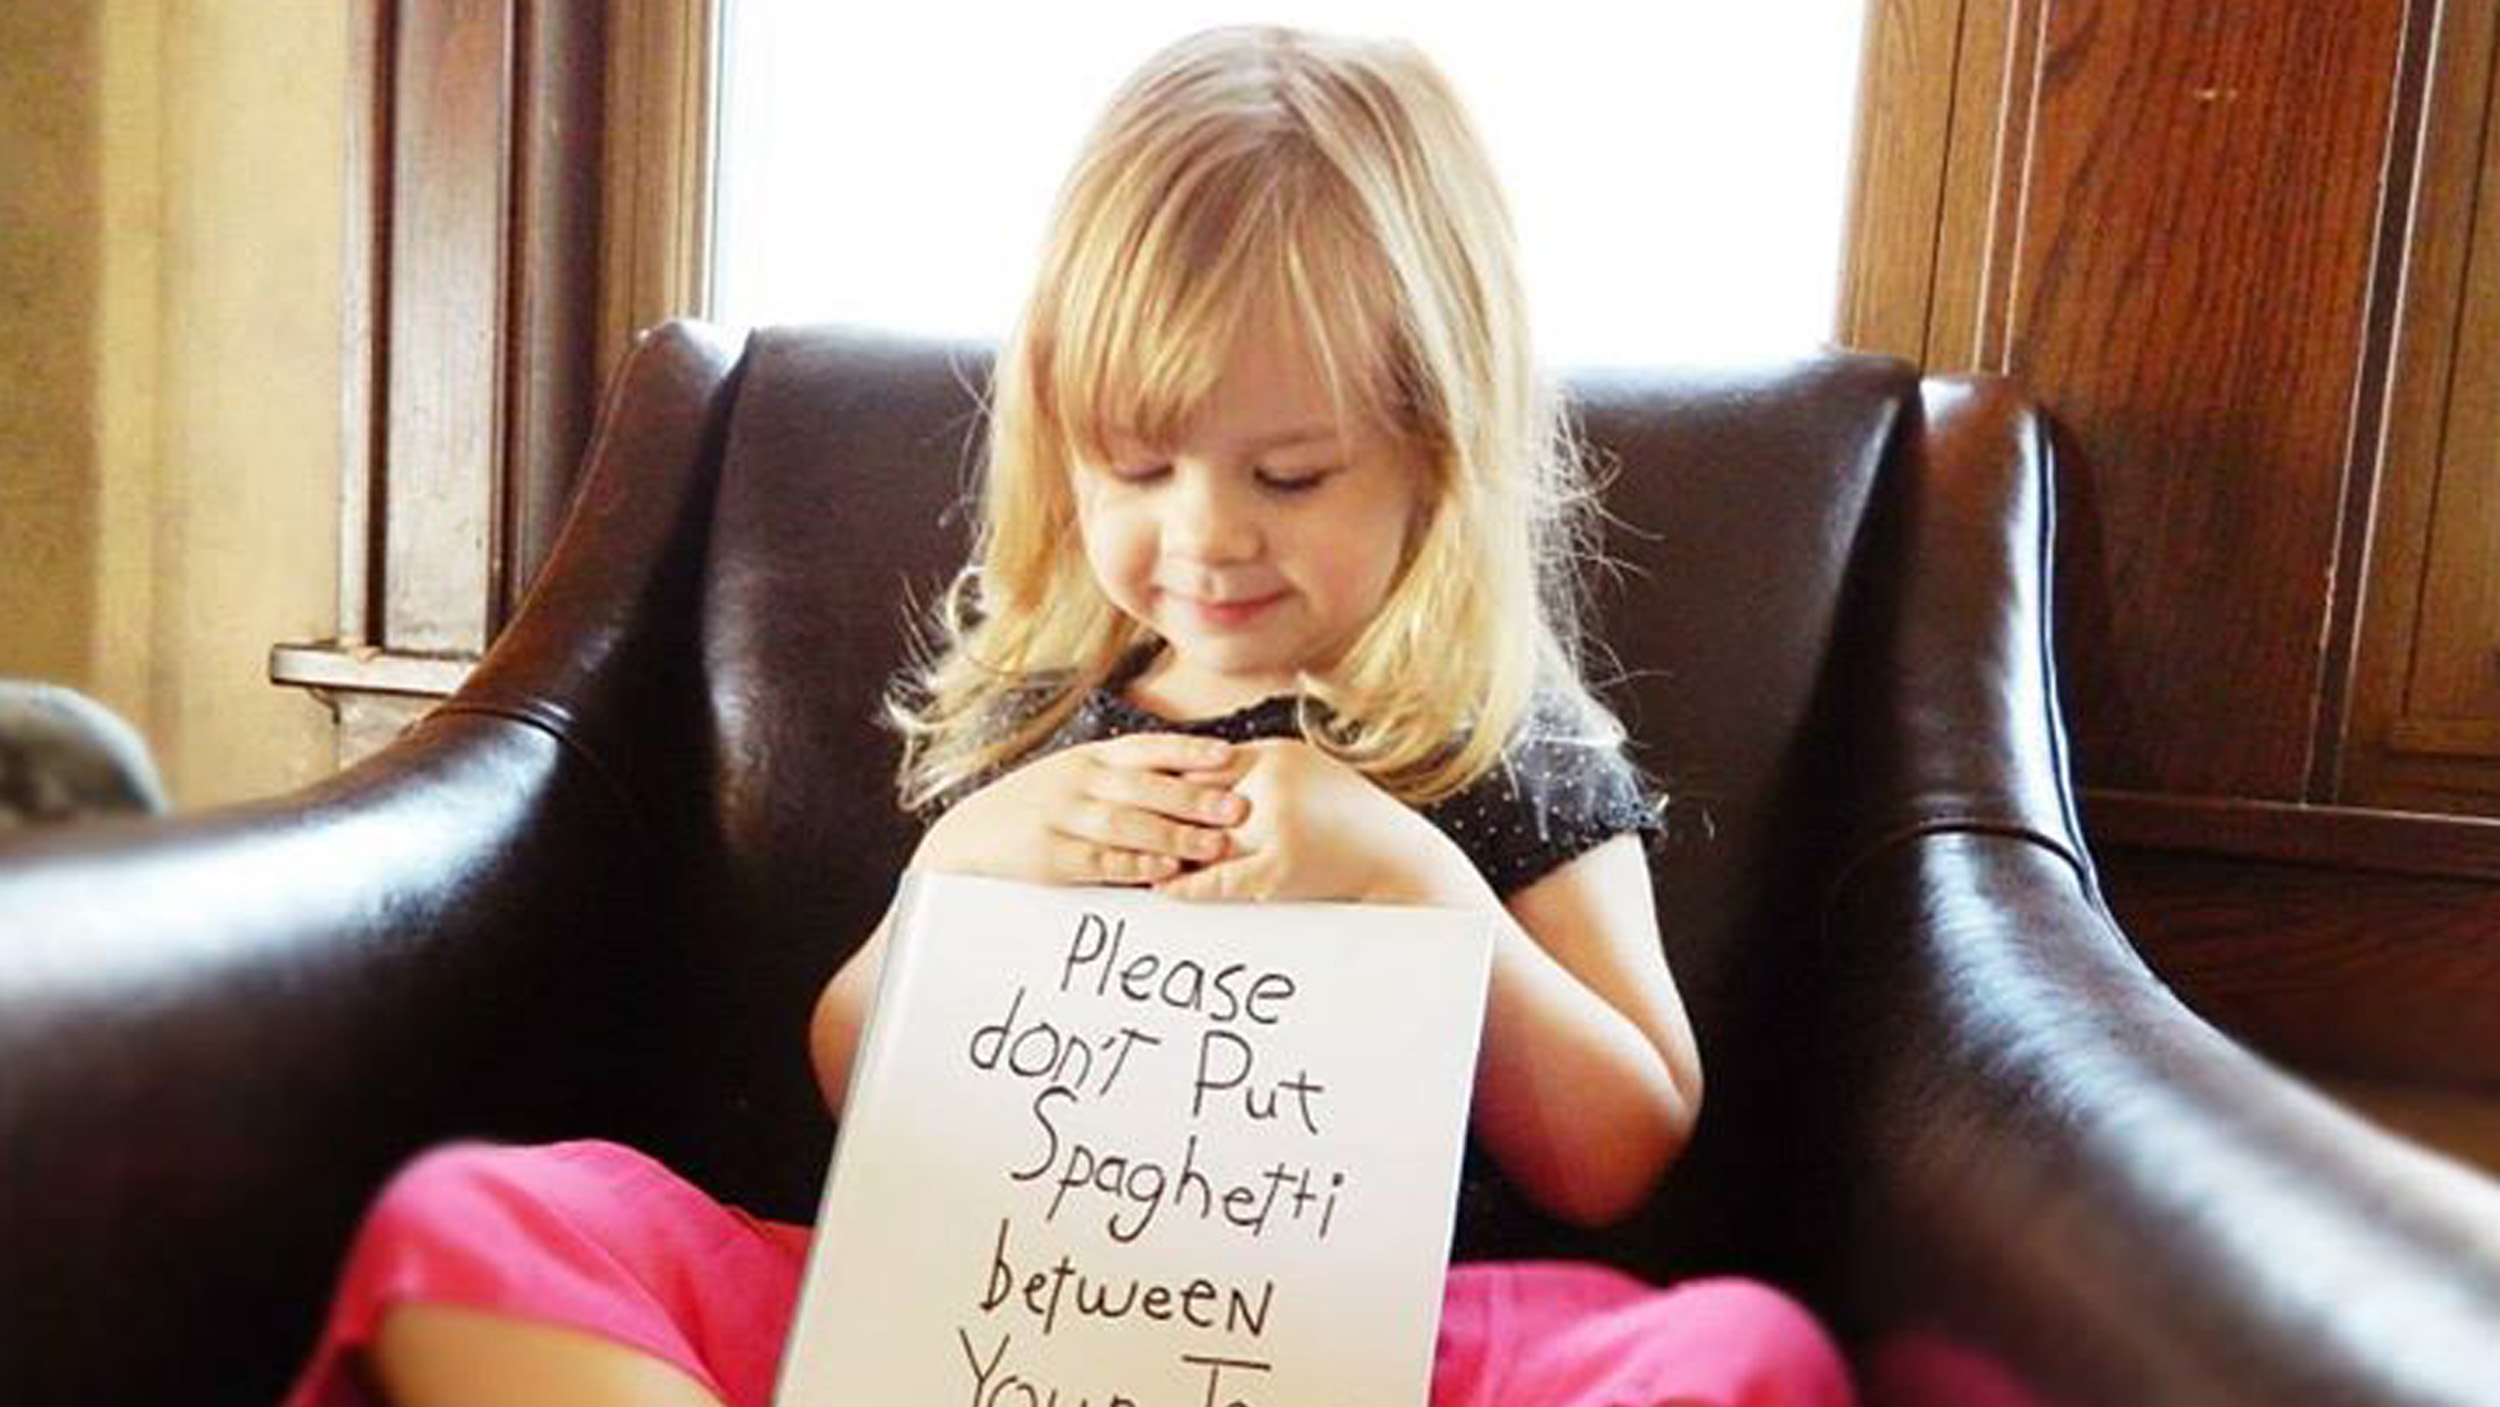 Little girl's funny quotes inspire dad's 'Spaghetti Toes' drawings